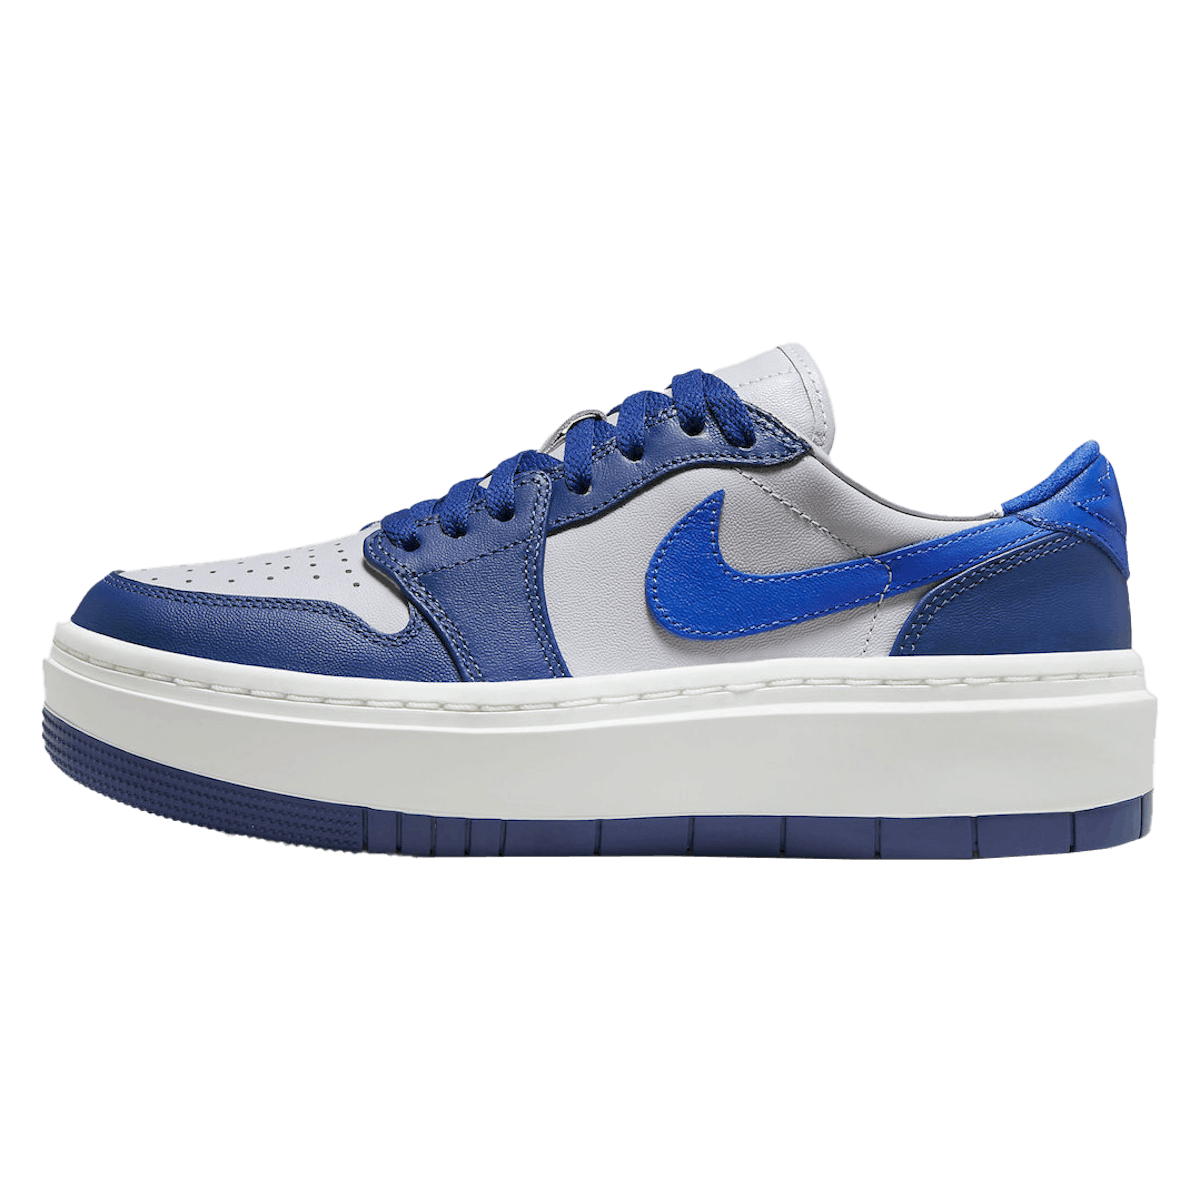 Air Jordan 1 Elevate Low Wmns "French Blue"